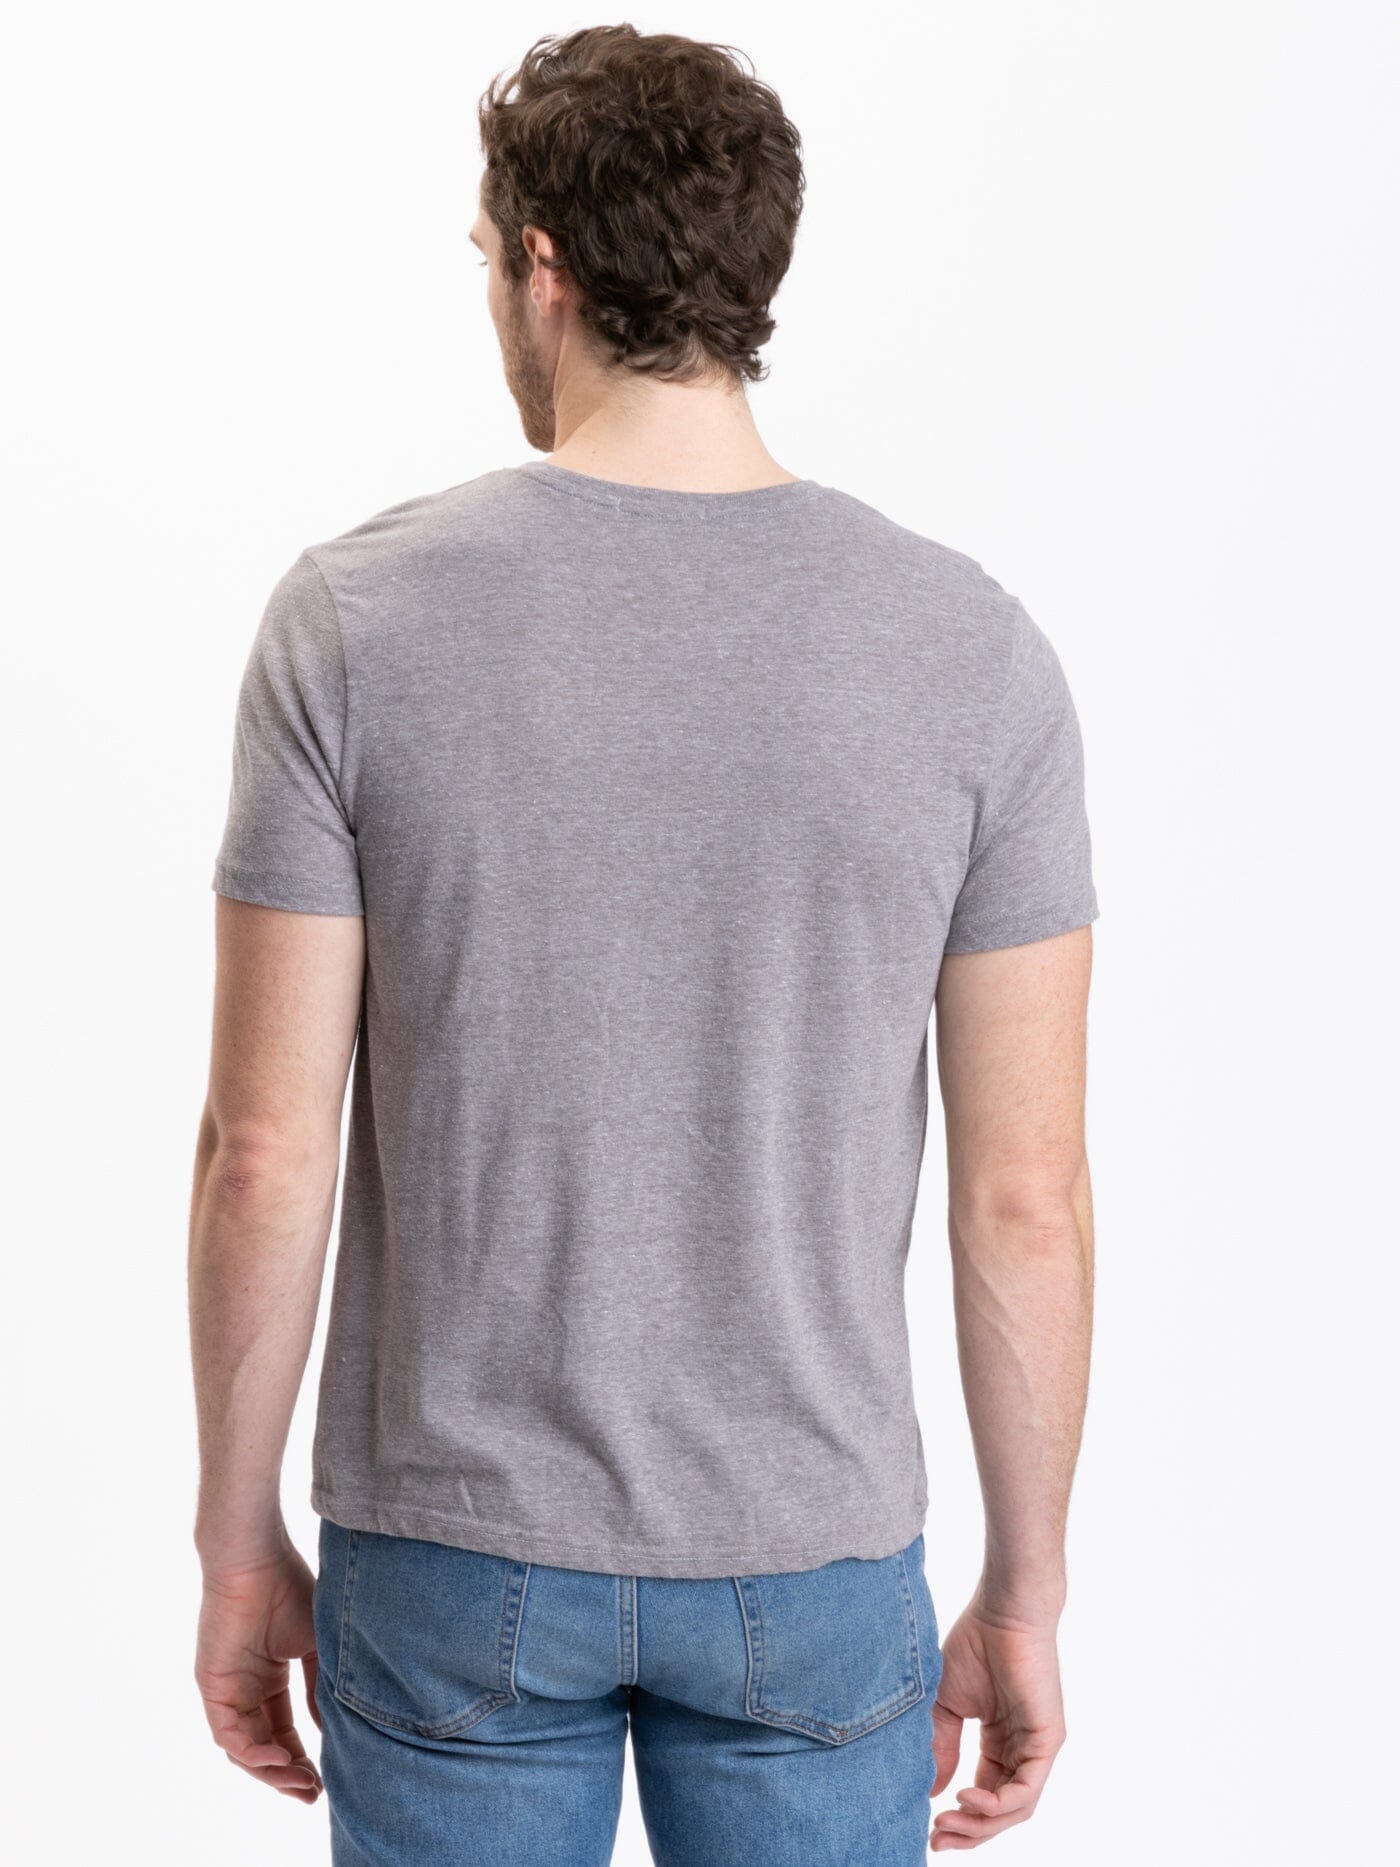 Triblend Crew Neck Tee 4 Threads Heather Grey – in Thought